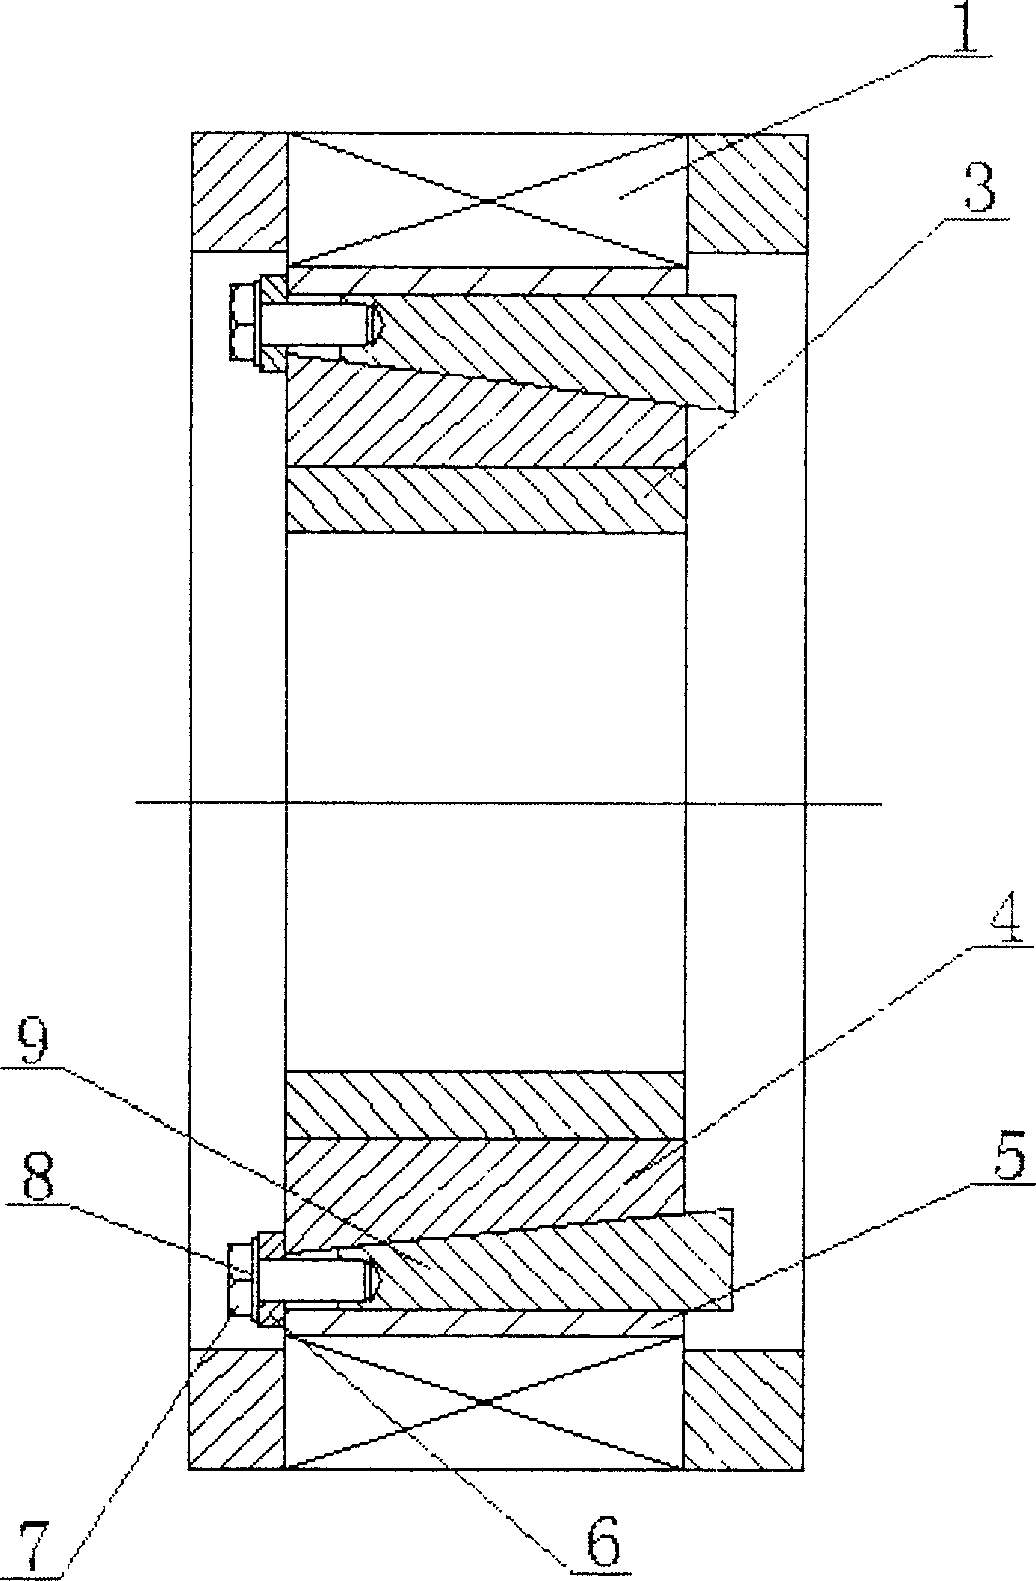 Magnetic-gas bearing and method for making compliant foil